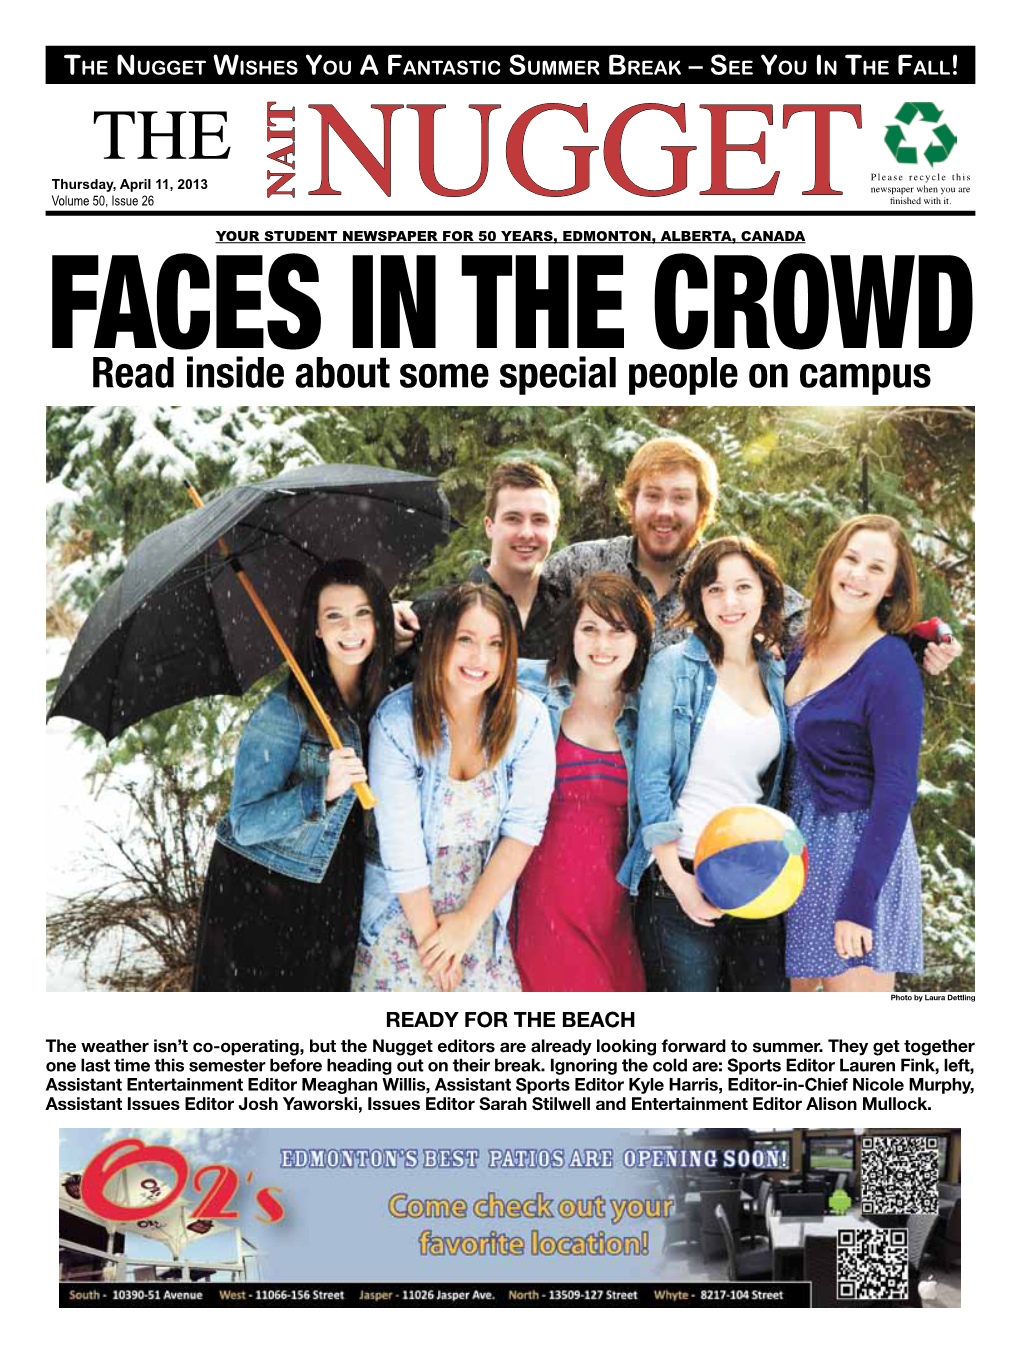 Read Inside About Some Special People on Campus